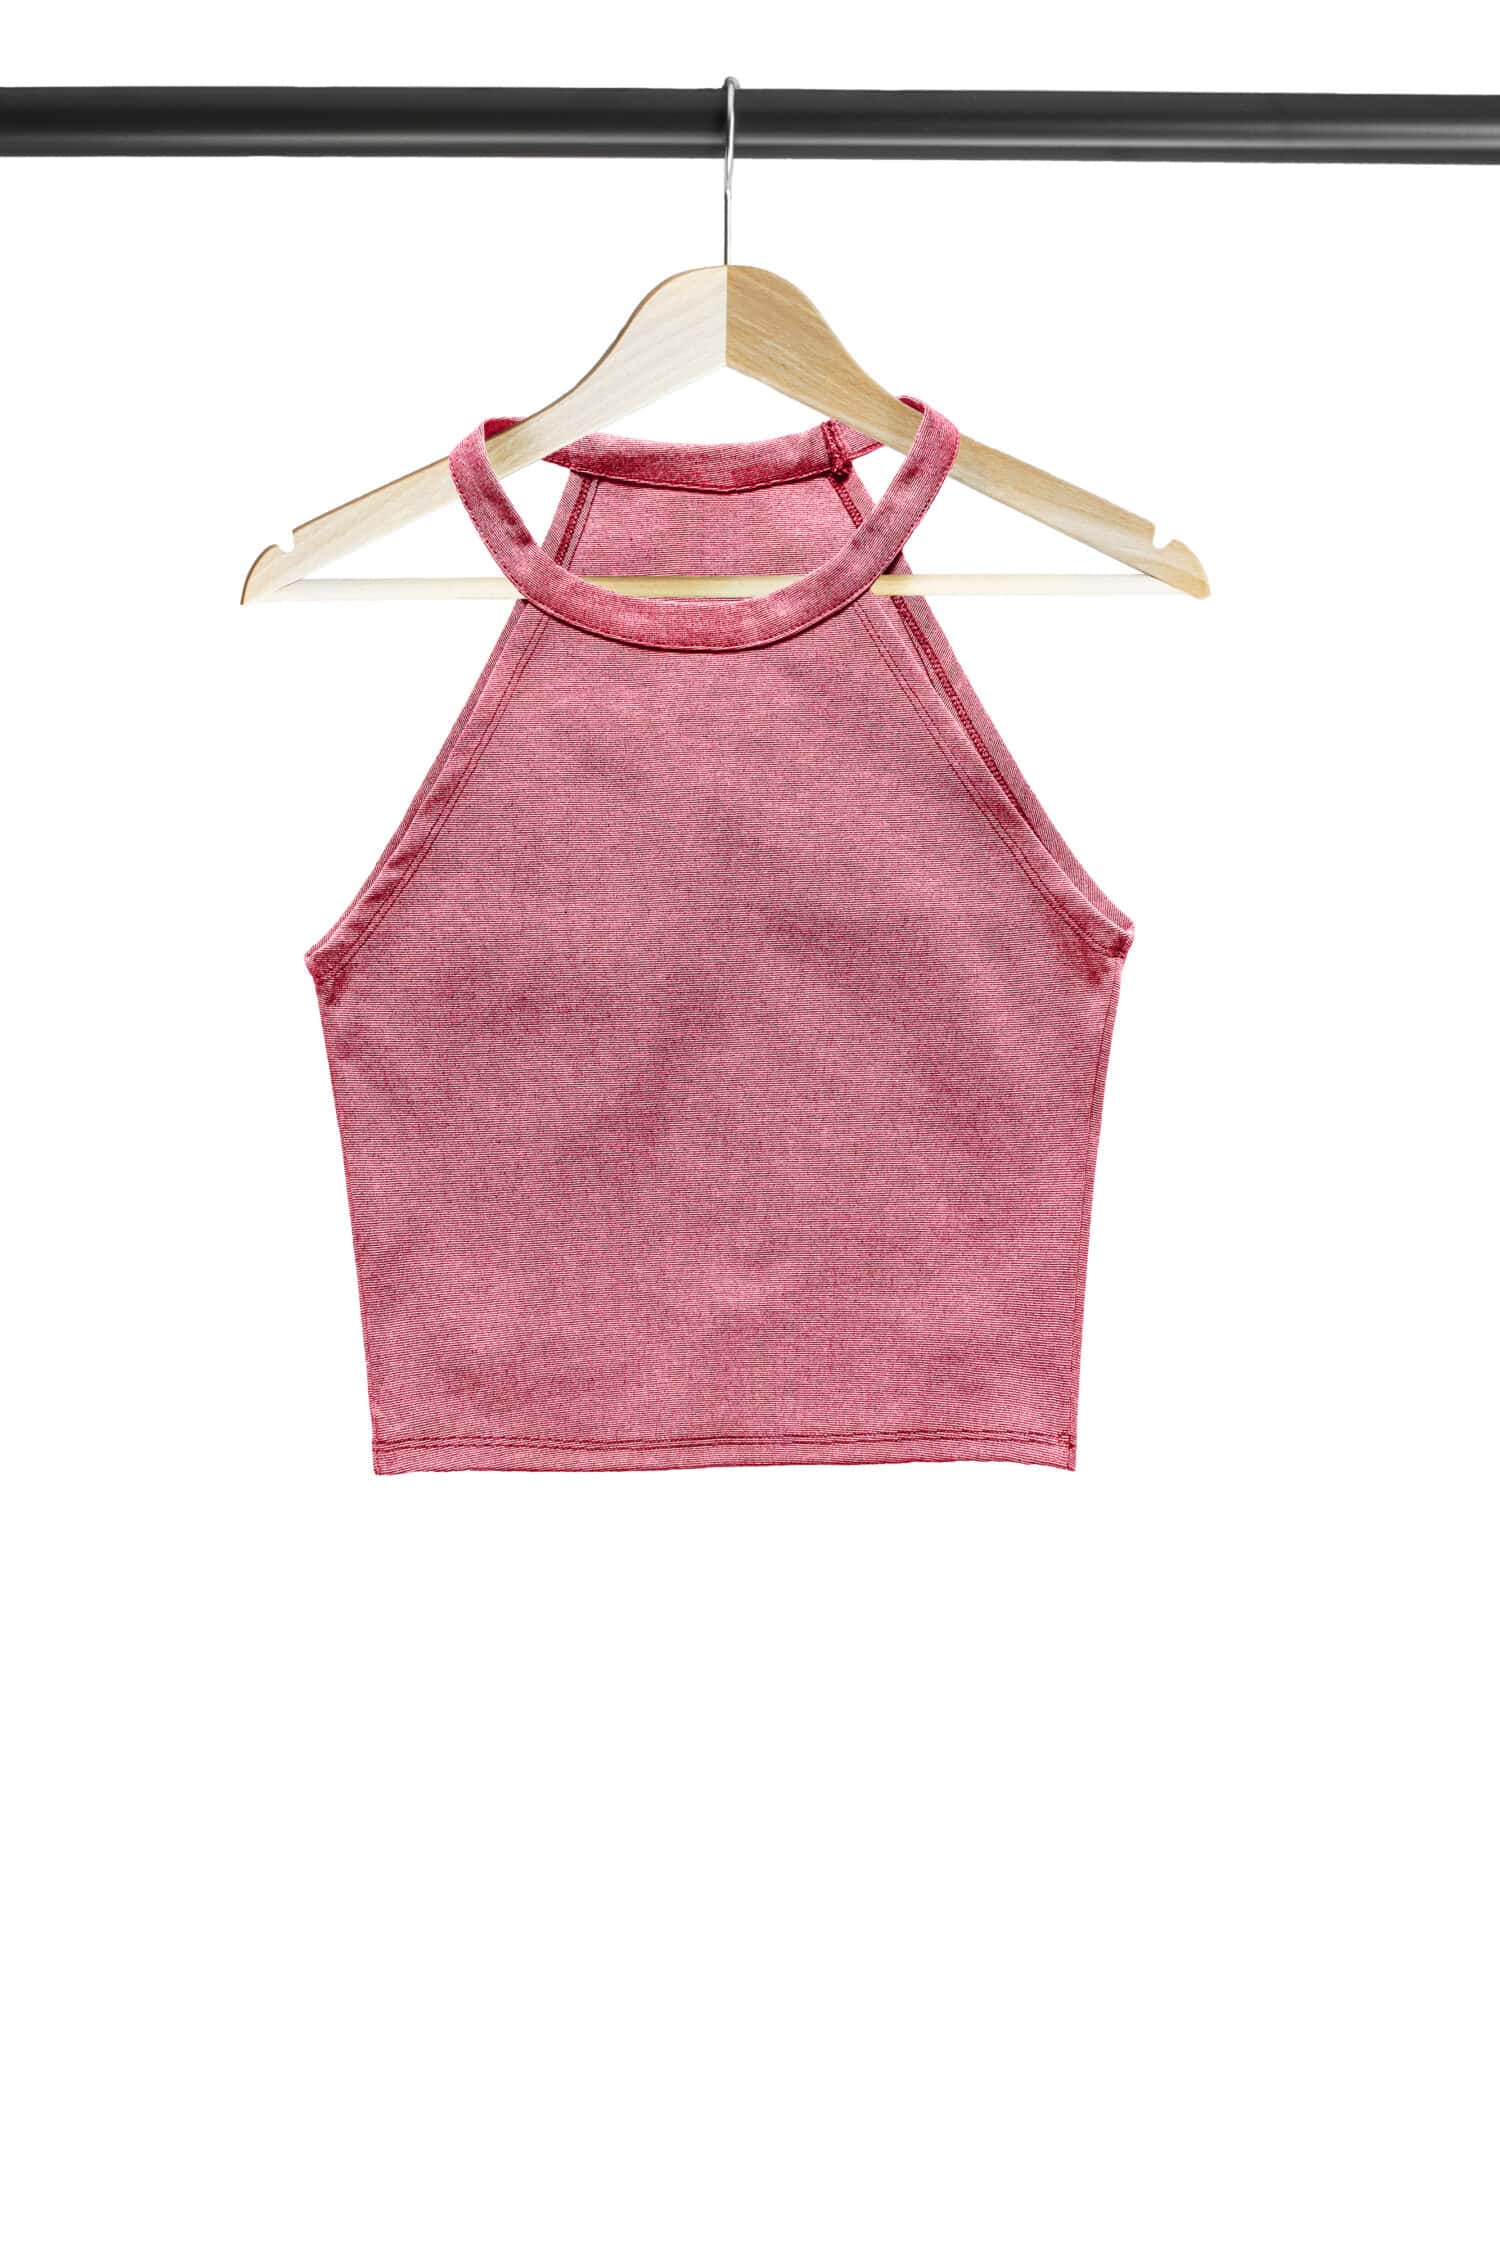 Pink crop top on wooden clothes rack isolated over white